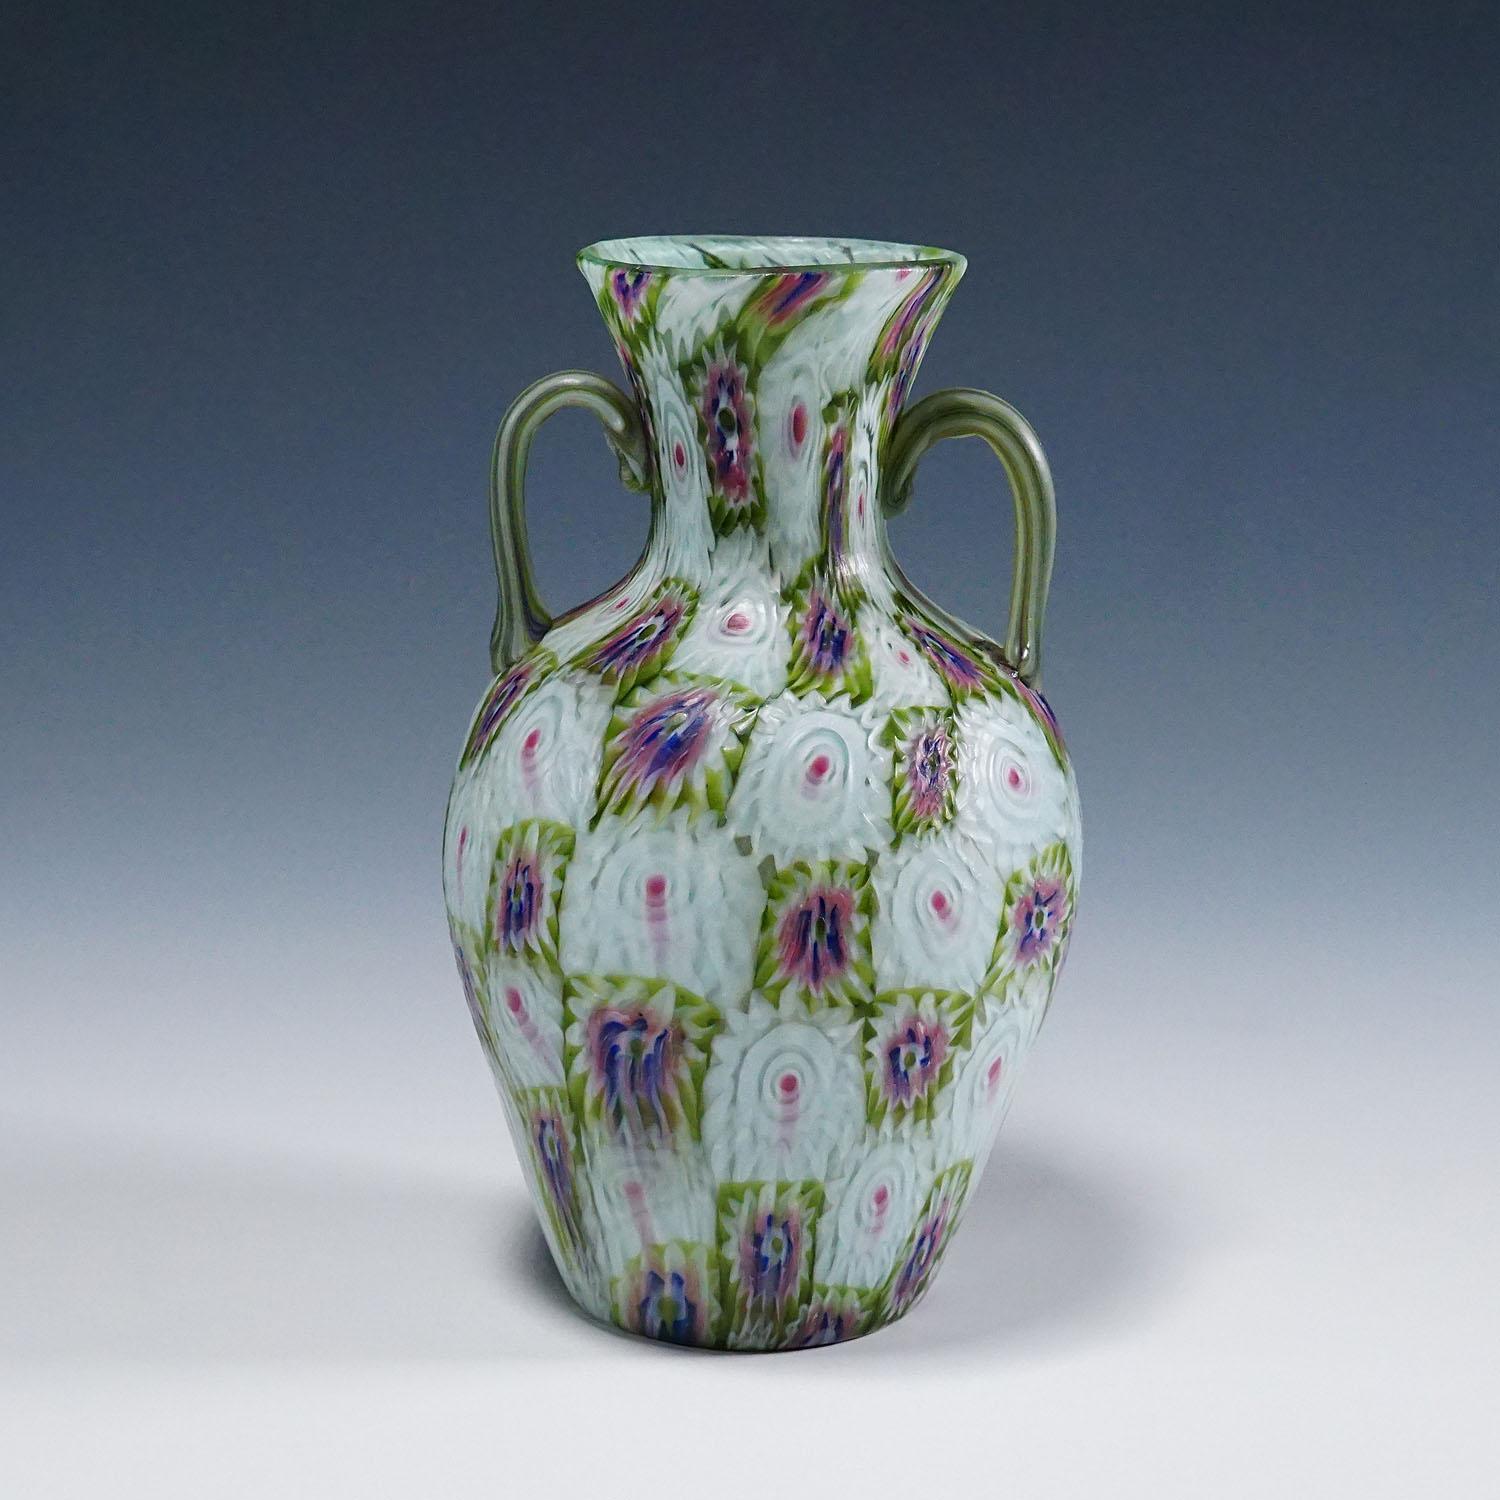 Antique Murrine Vase with Handles, Fratelli Toso Murano ca. 1920s
Item e7093
A large murrine glass vase manufactured by Vetreria Fratelli Toso, Murano around 1920. Made of polychrome murrines in blue, green, purple and white which were melted